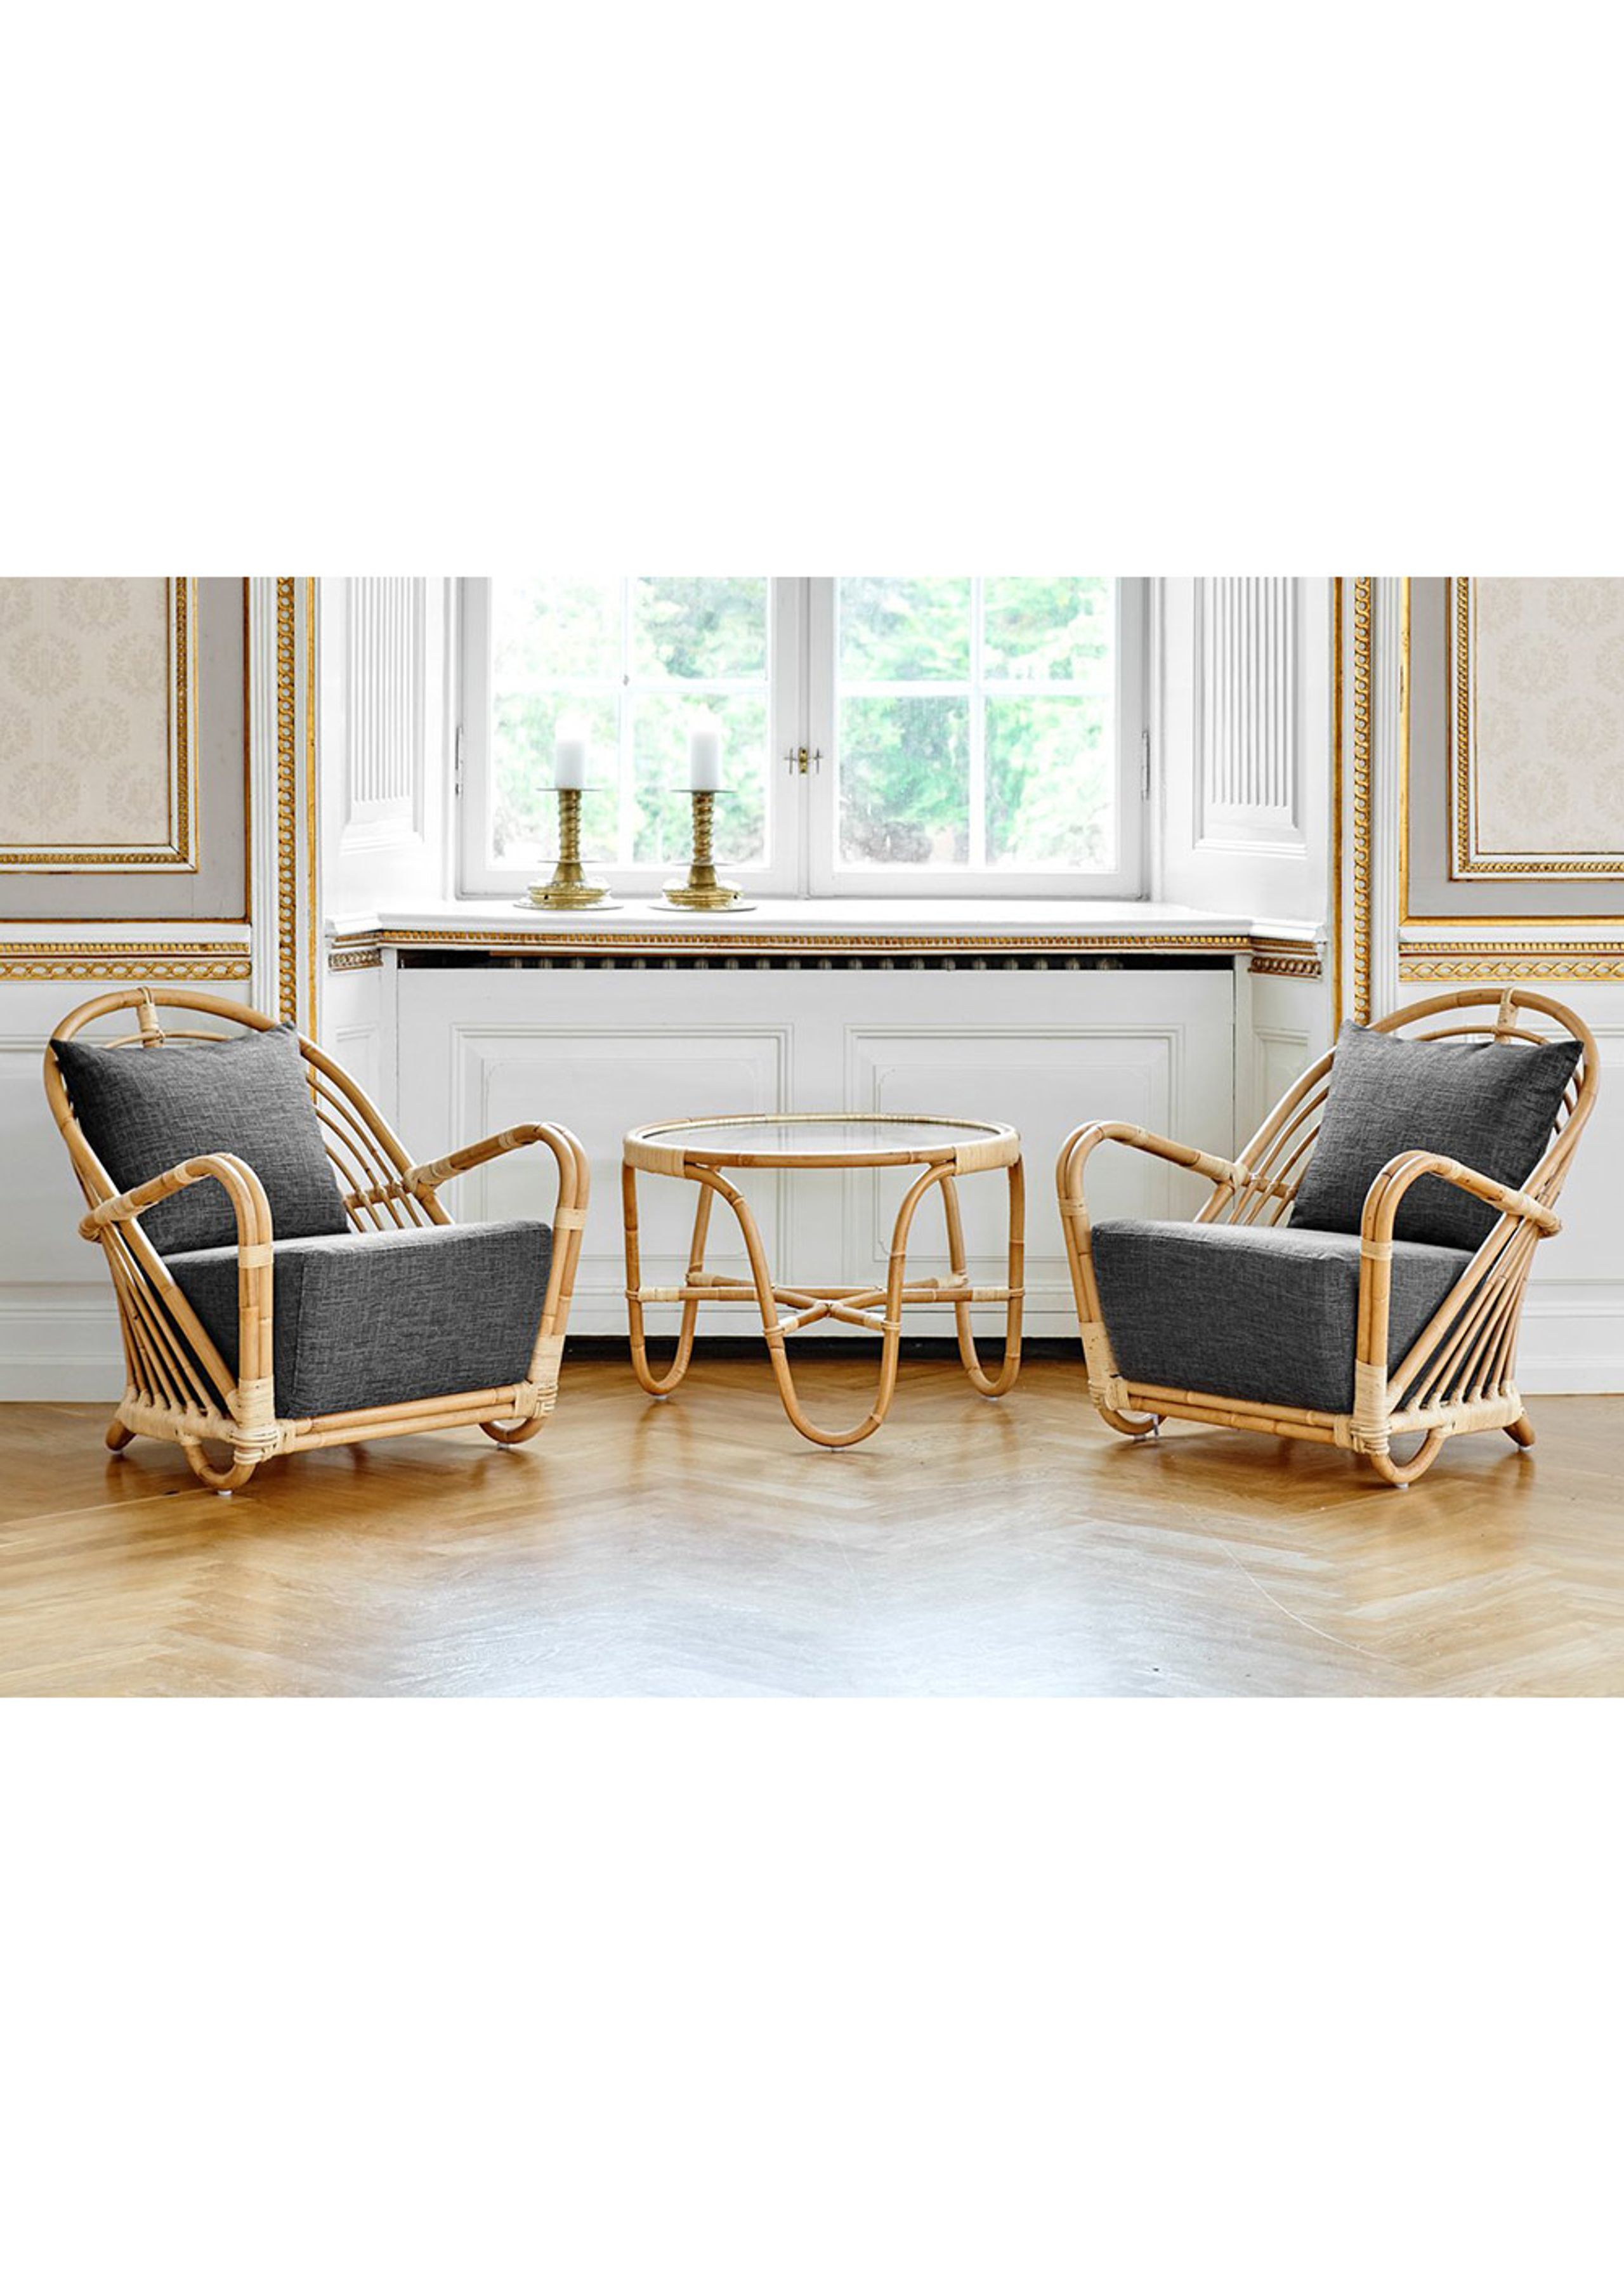 Sika - Fauteuil - Charlottenborg lounge chair - Nature - Dark Blue